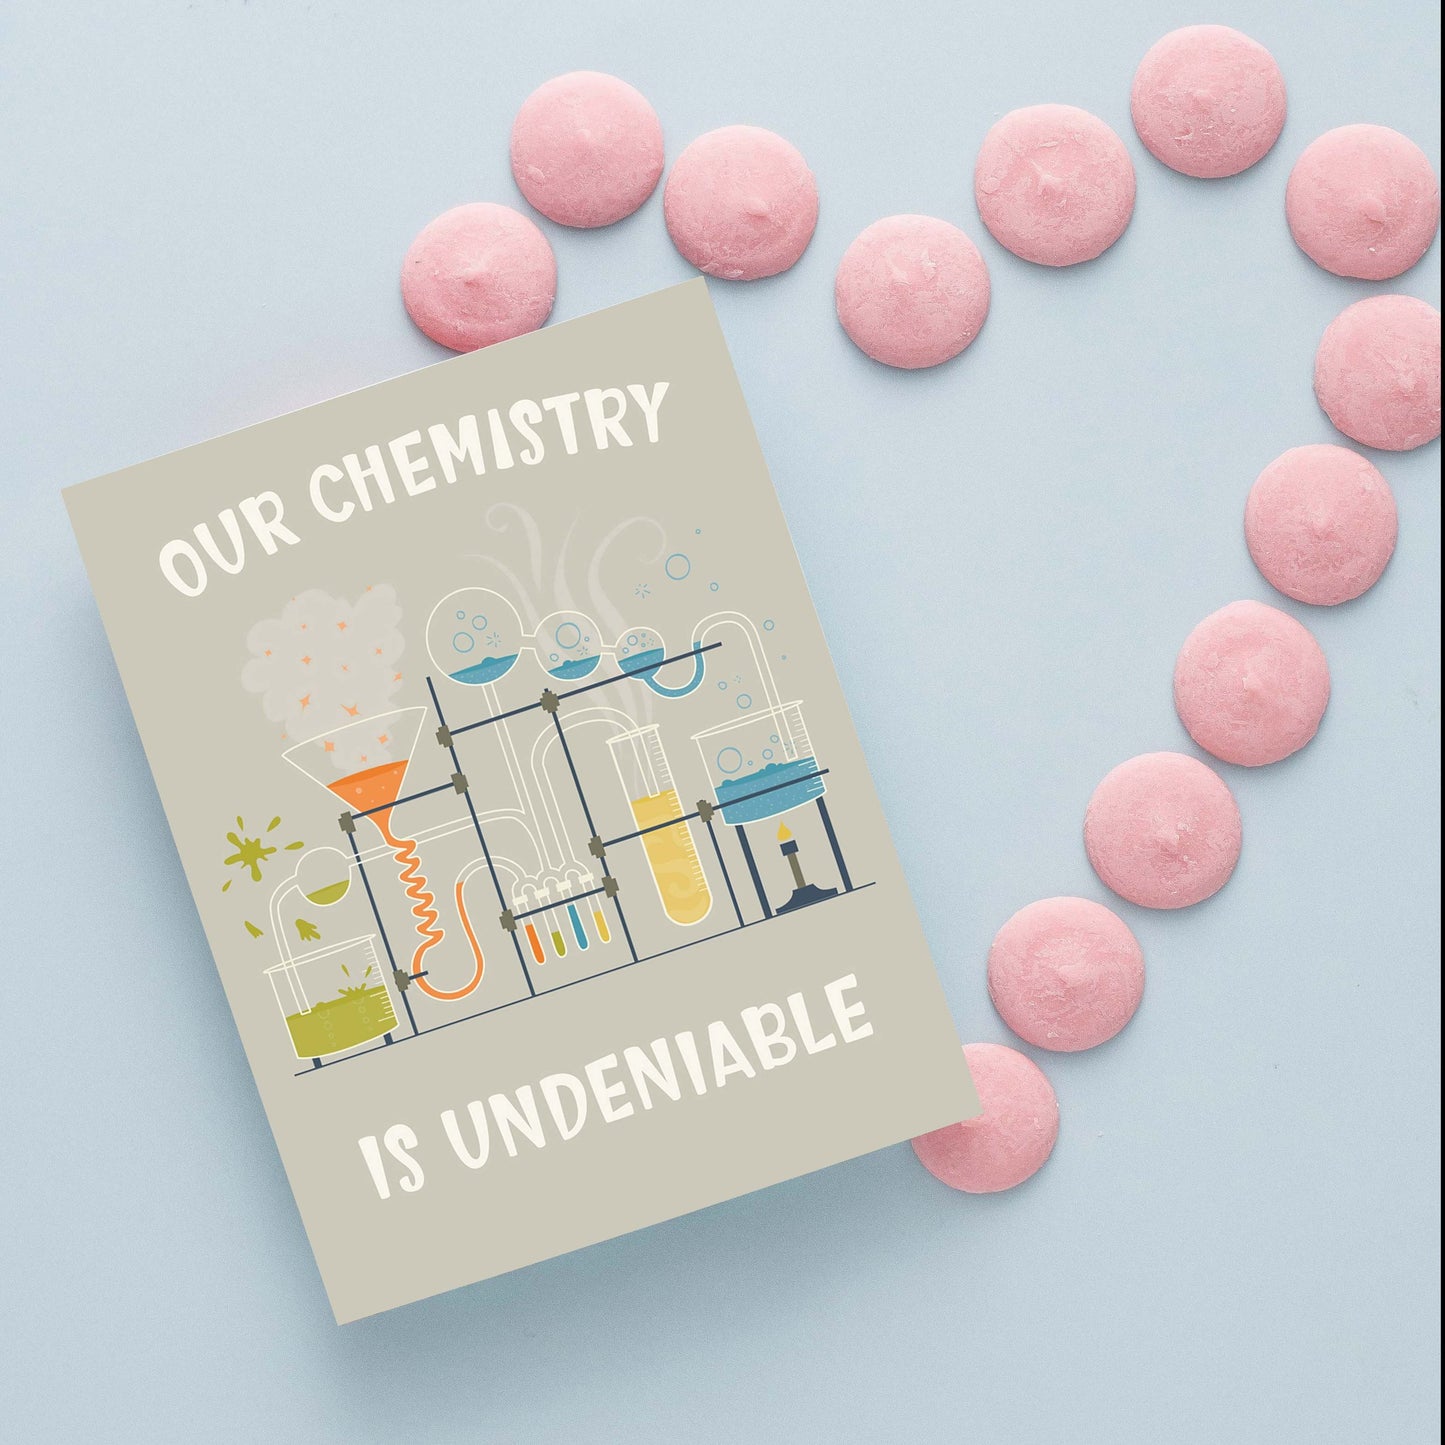 Our Chemistry is Undeniable Valentine's Day Card